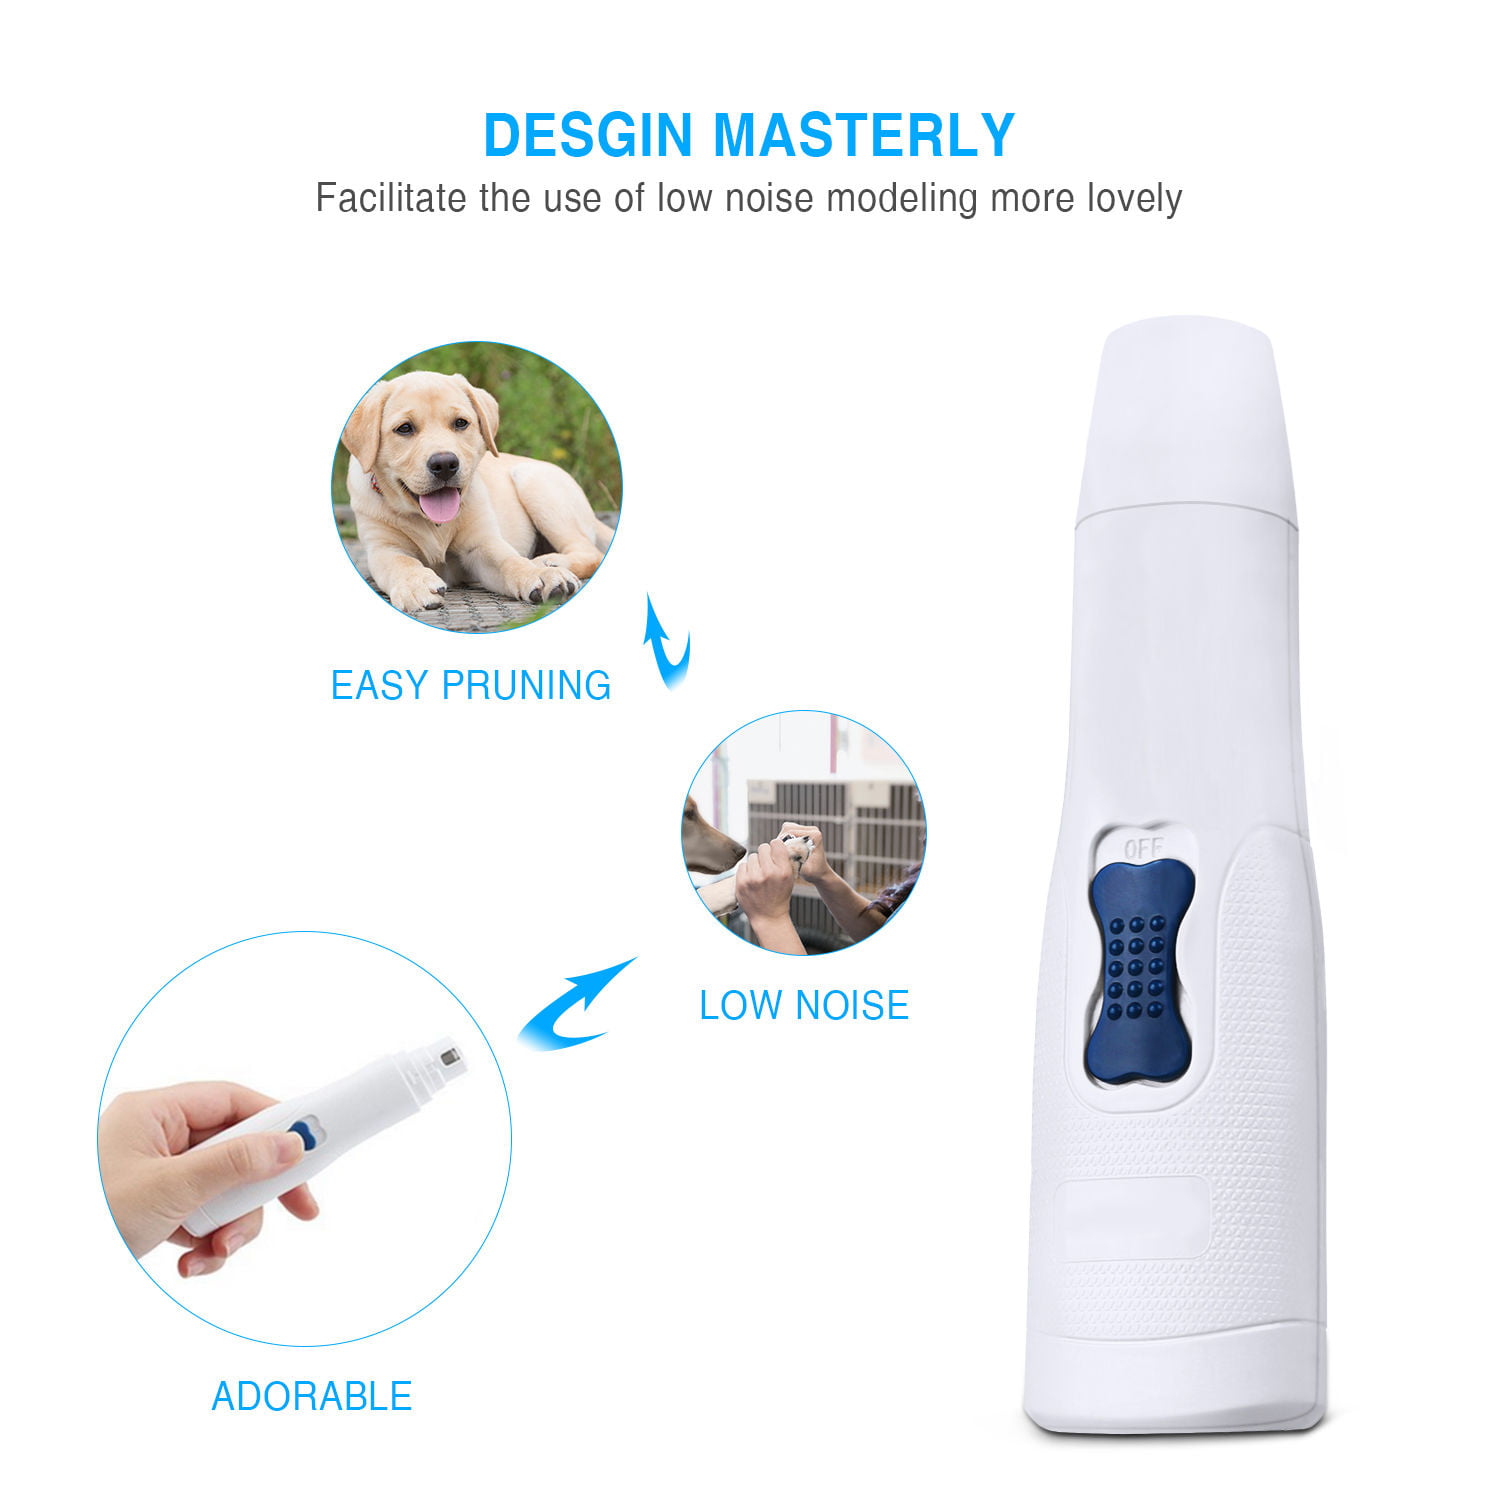 Dog Nail Grinder Upgraded - Professional 2-Speed Electric Rechargeable Pet  Nail Trimmer Painless Paws Grooming & Smoothing for Small Medium Large Dogs  & Cats, White - Walmart.com